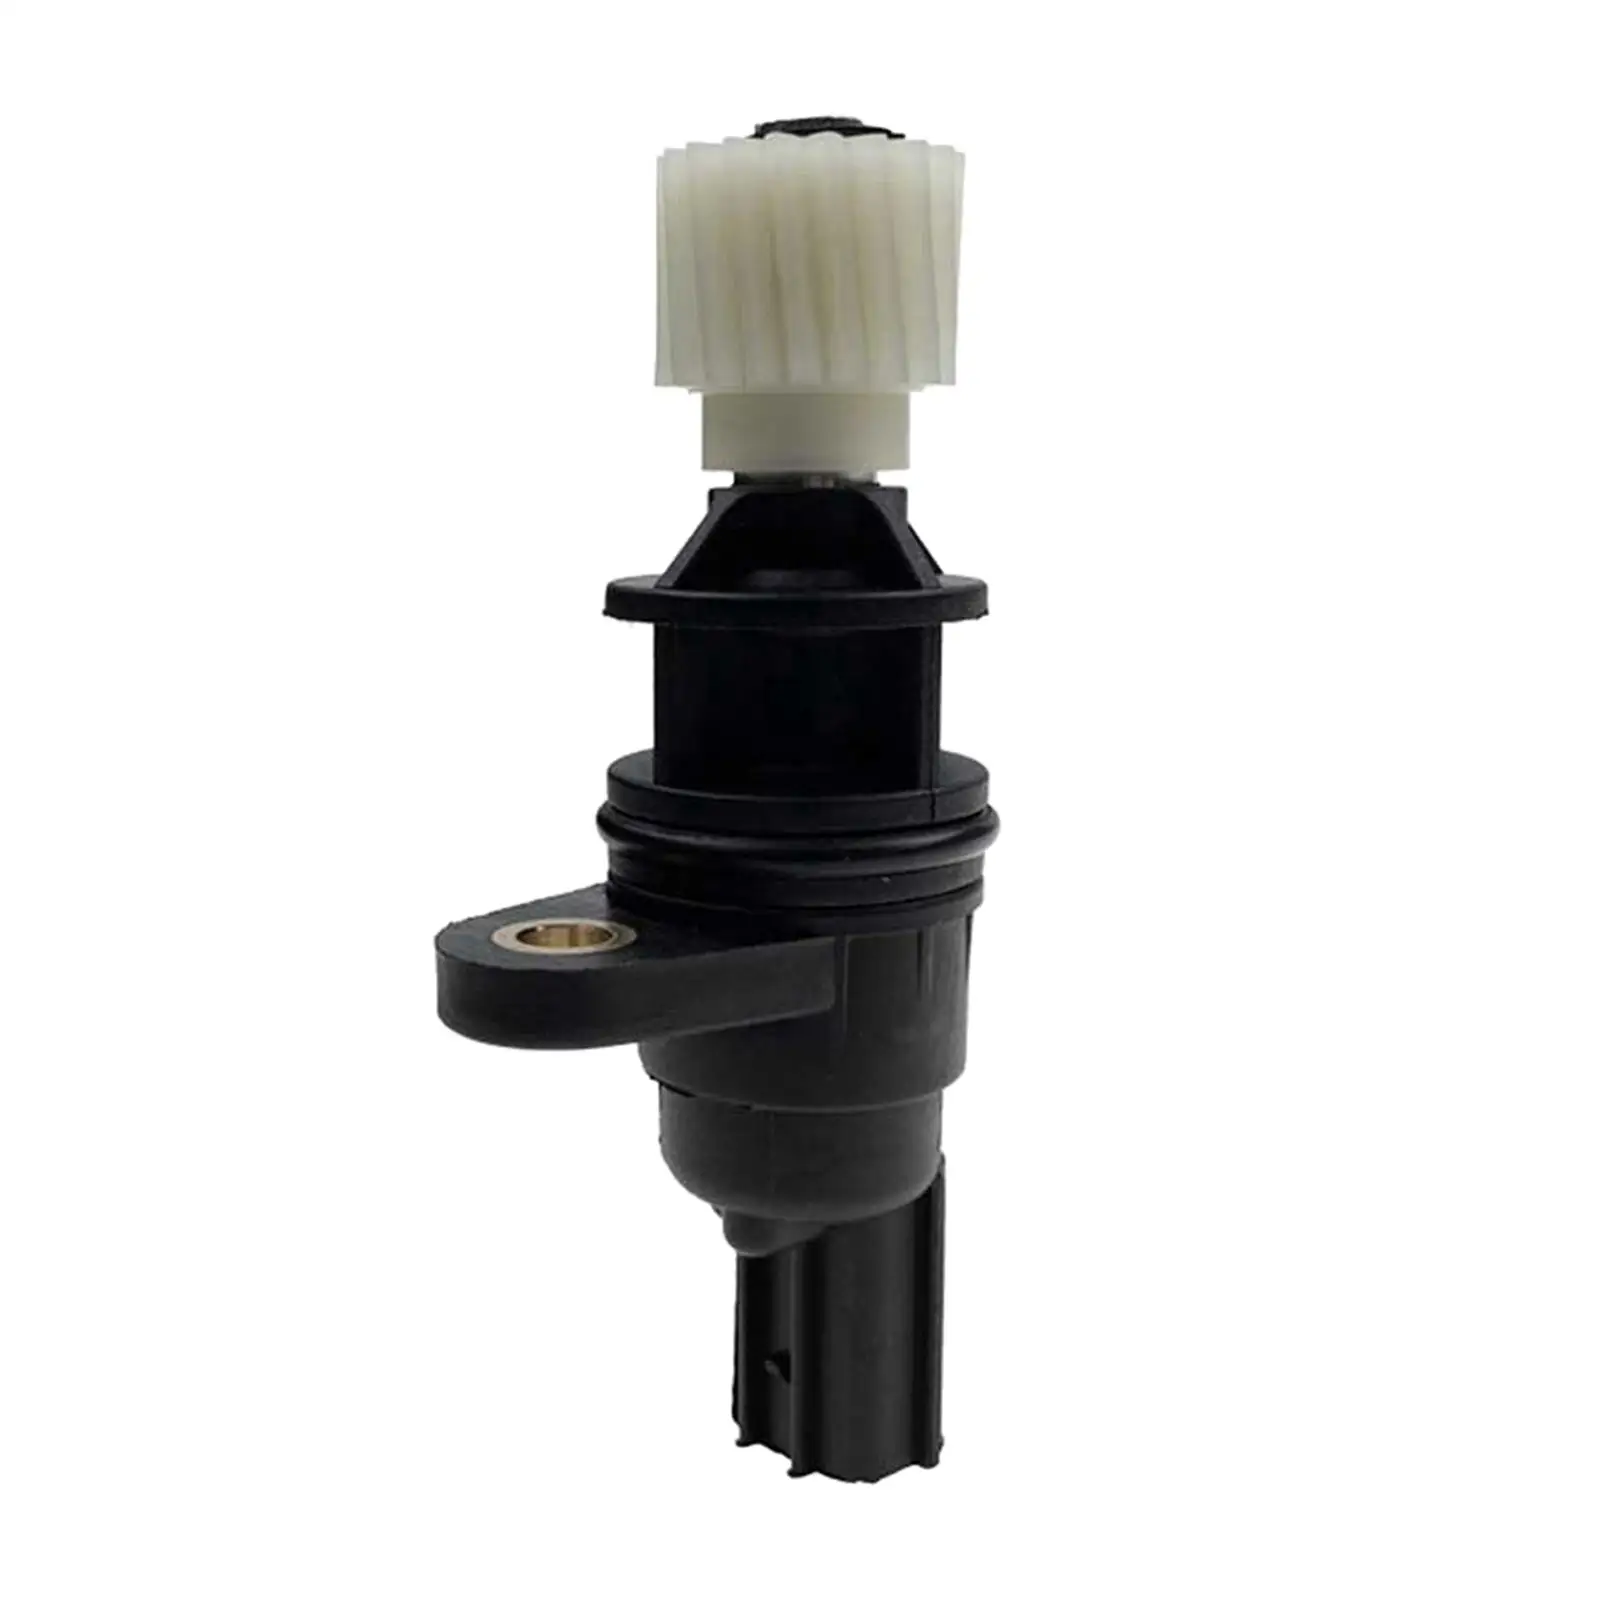 R510-17400 Speed Sensor R51017400 M5AC17400 for Replaces Automotive Accessories Professional